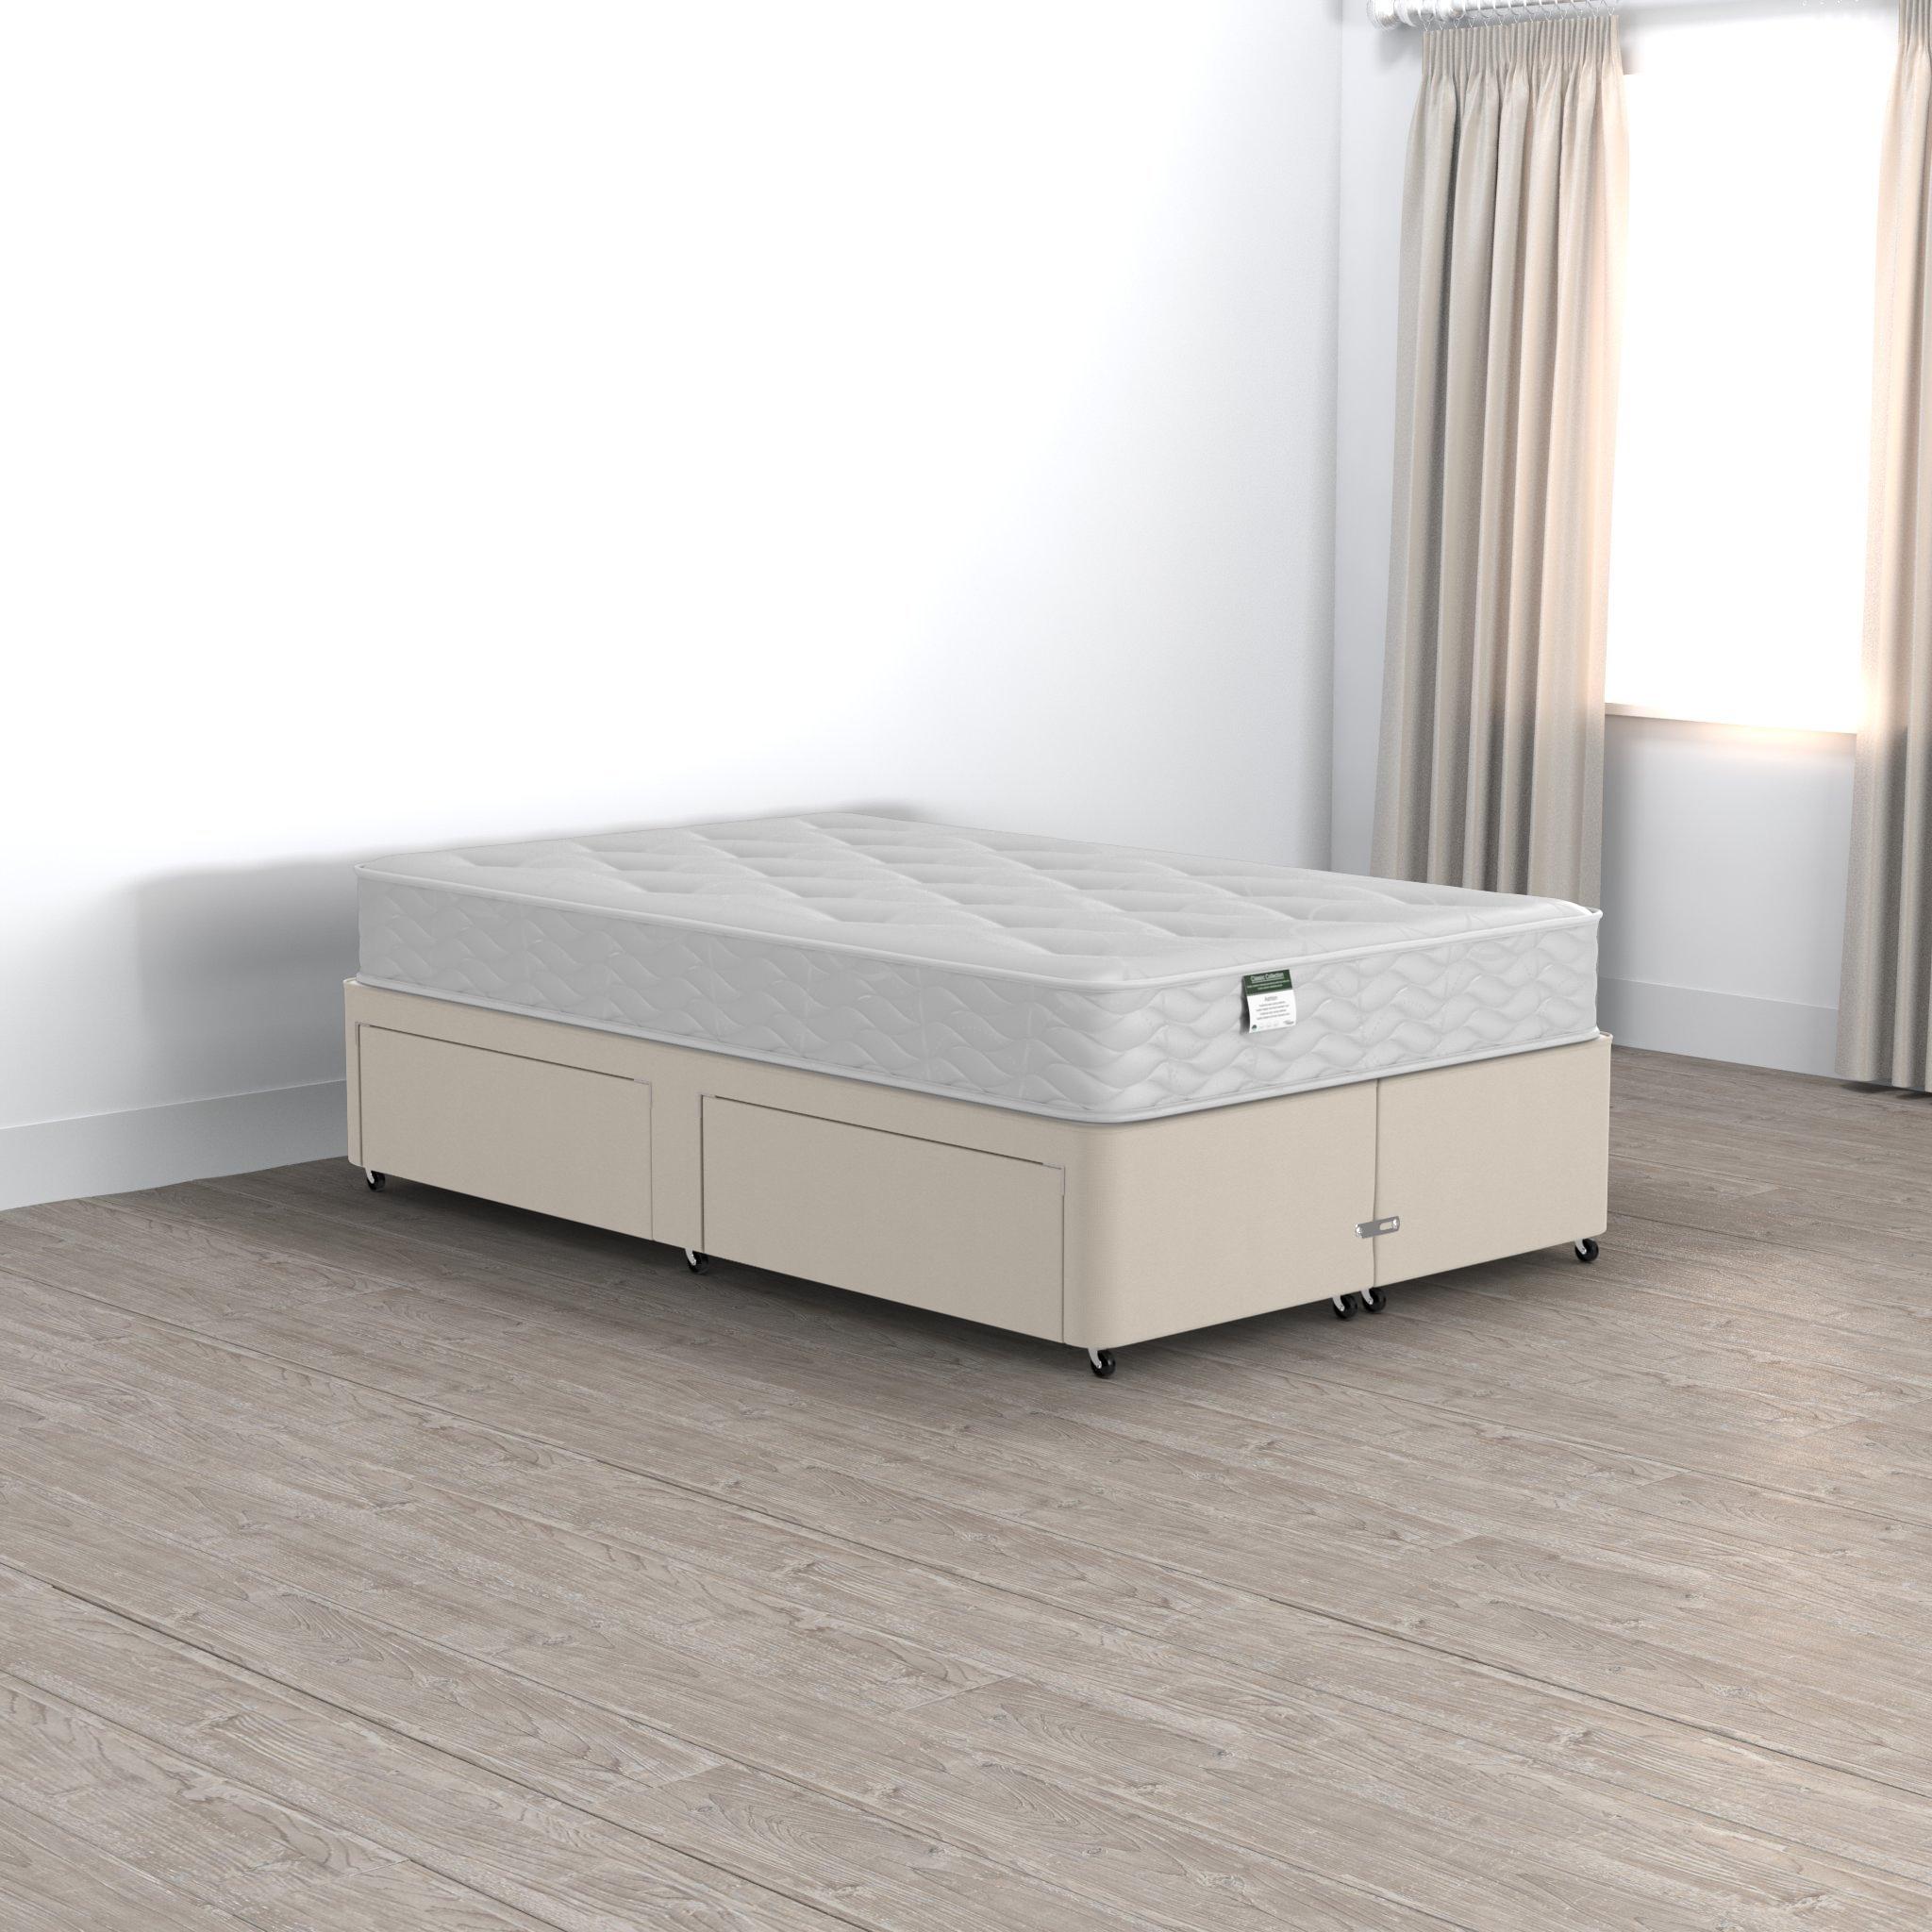 Classic Beaumont Small Double 2 Drawer Divan Set